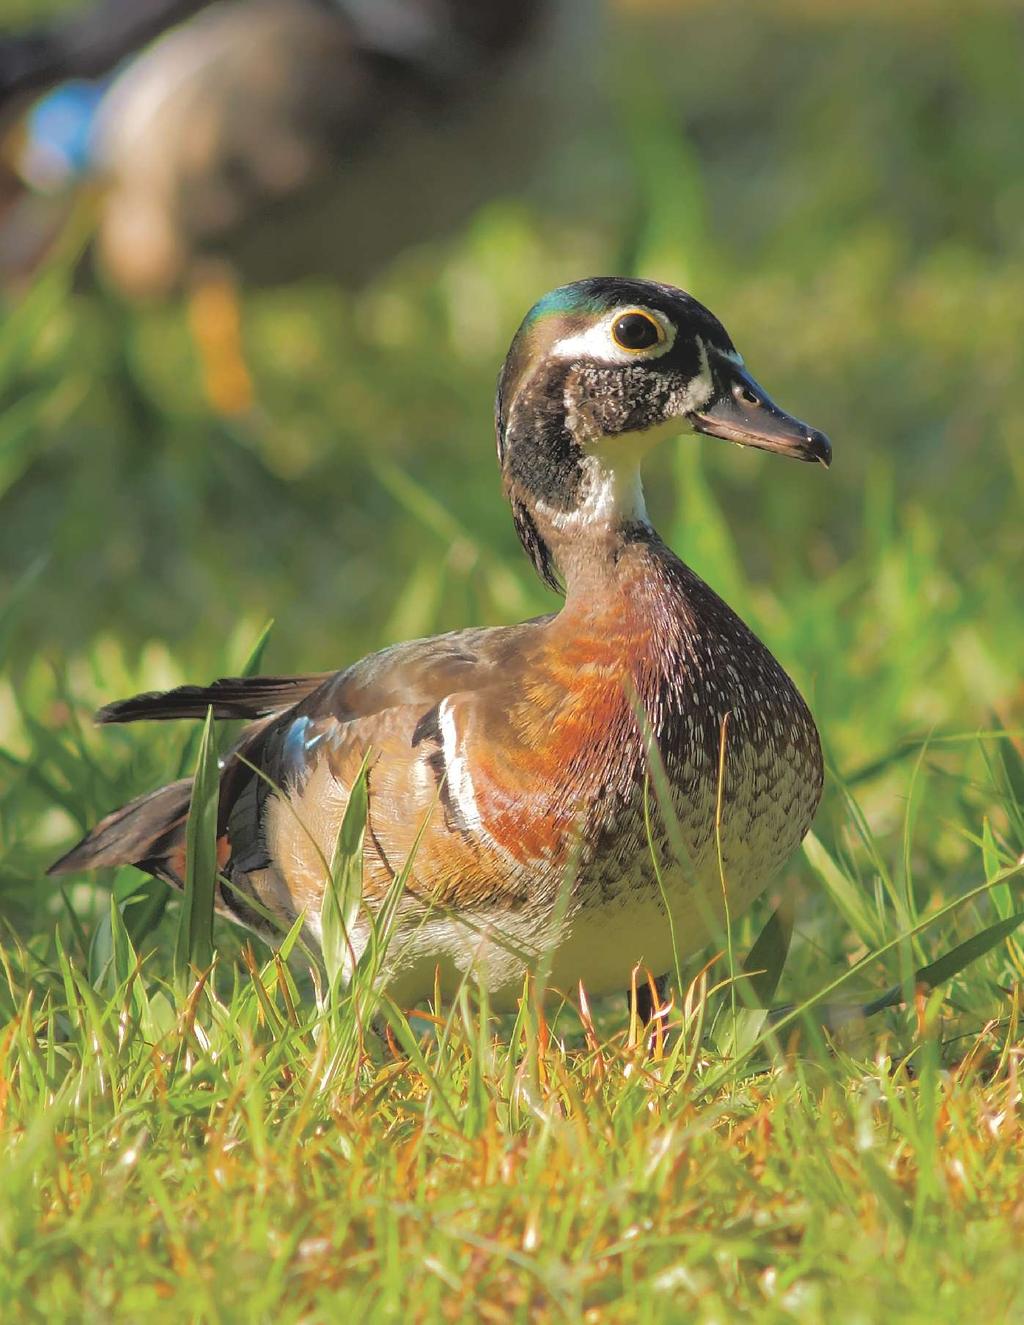 Although many birders know that male ducks acquire a female-like eclipse plumage in the summer, fewer are aware that female ducks can acquire a male-like plumage as they grow older.